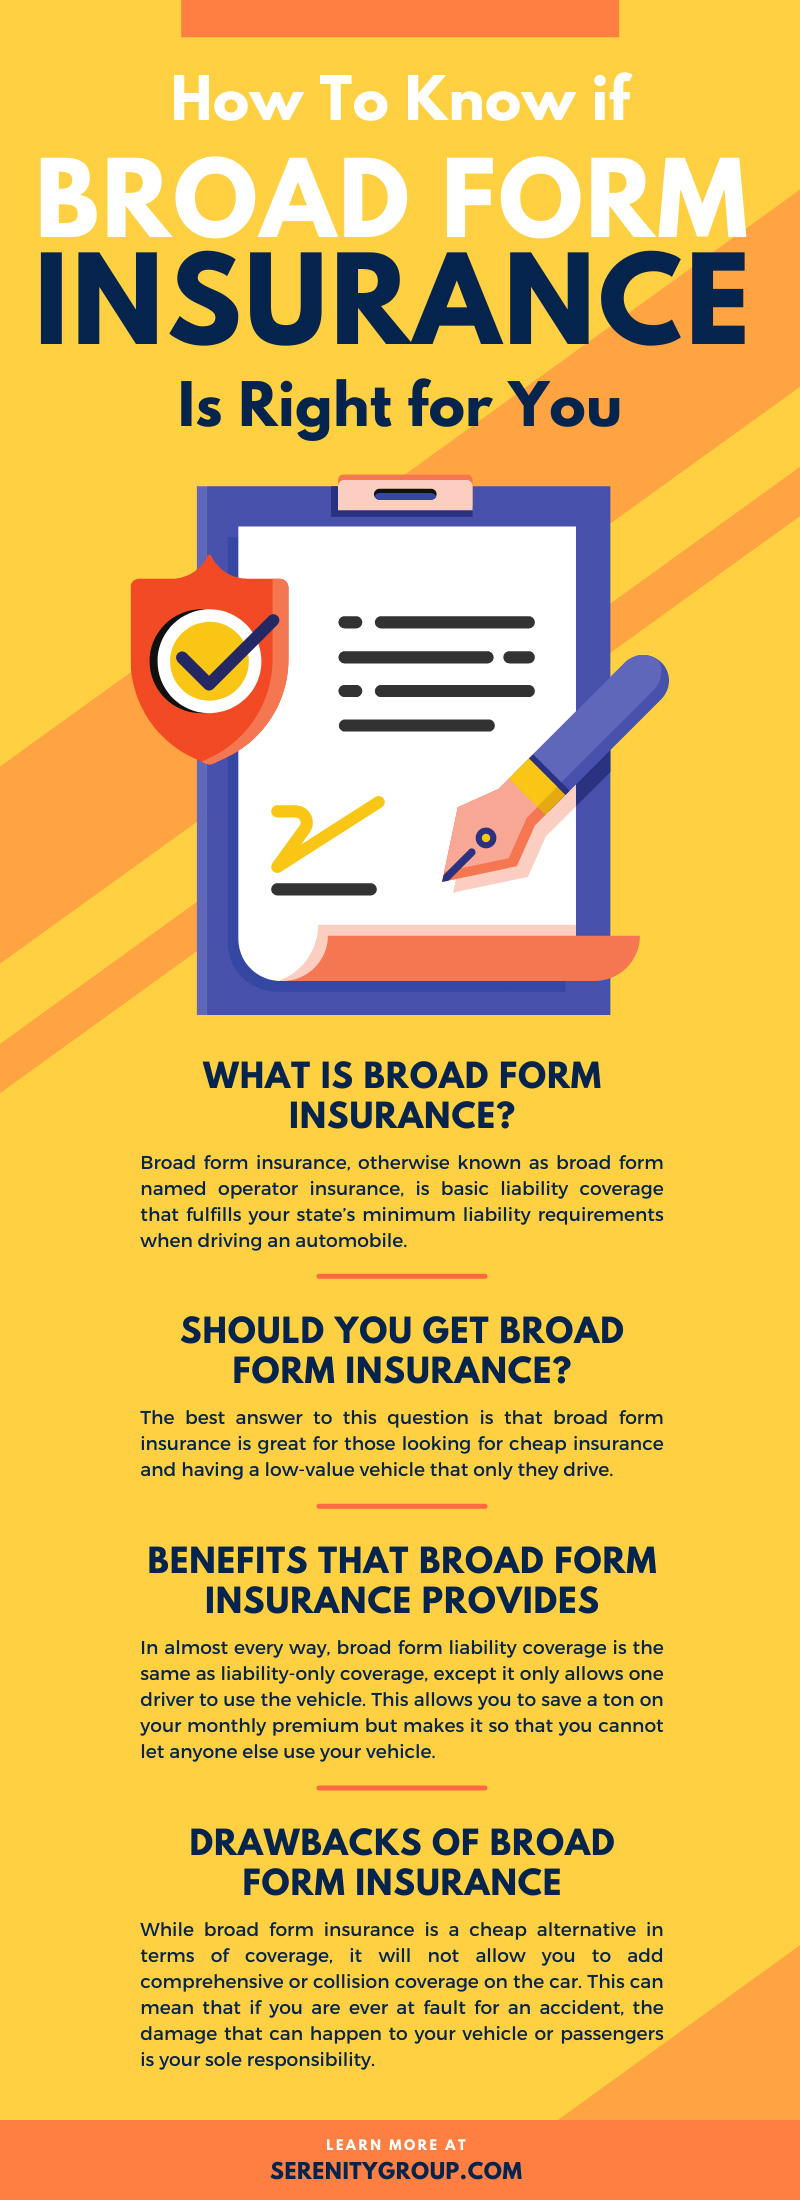 How To Know if Broad Form Insurance Is Right for You